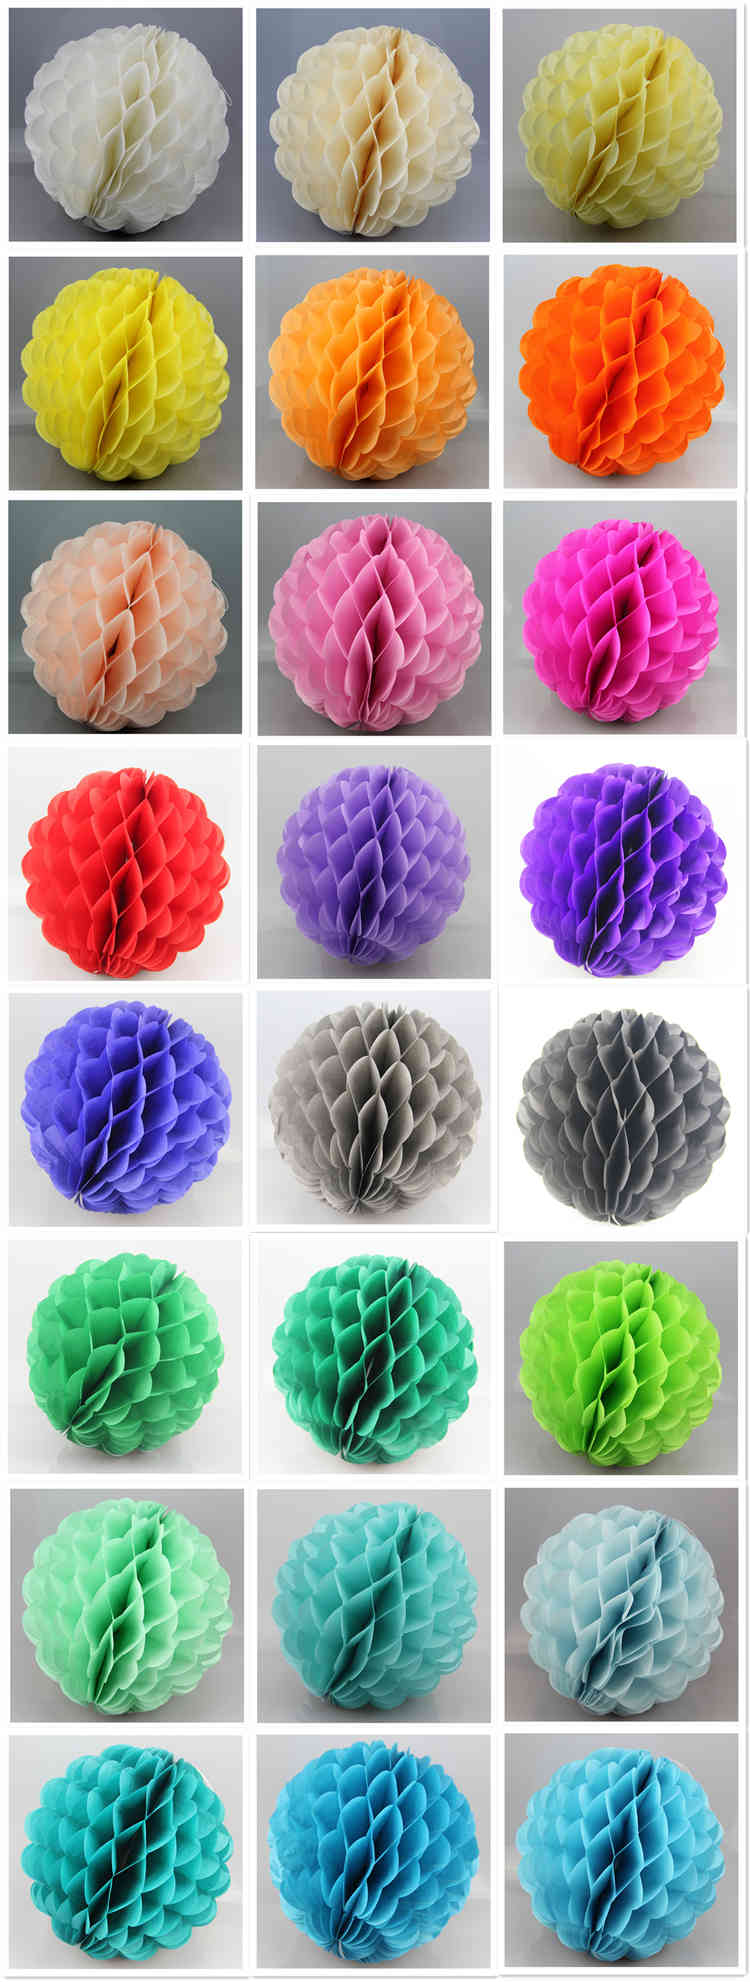 colorful Special Shaped Tissue Paper Honeycomb Ball